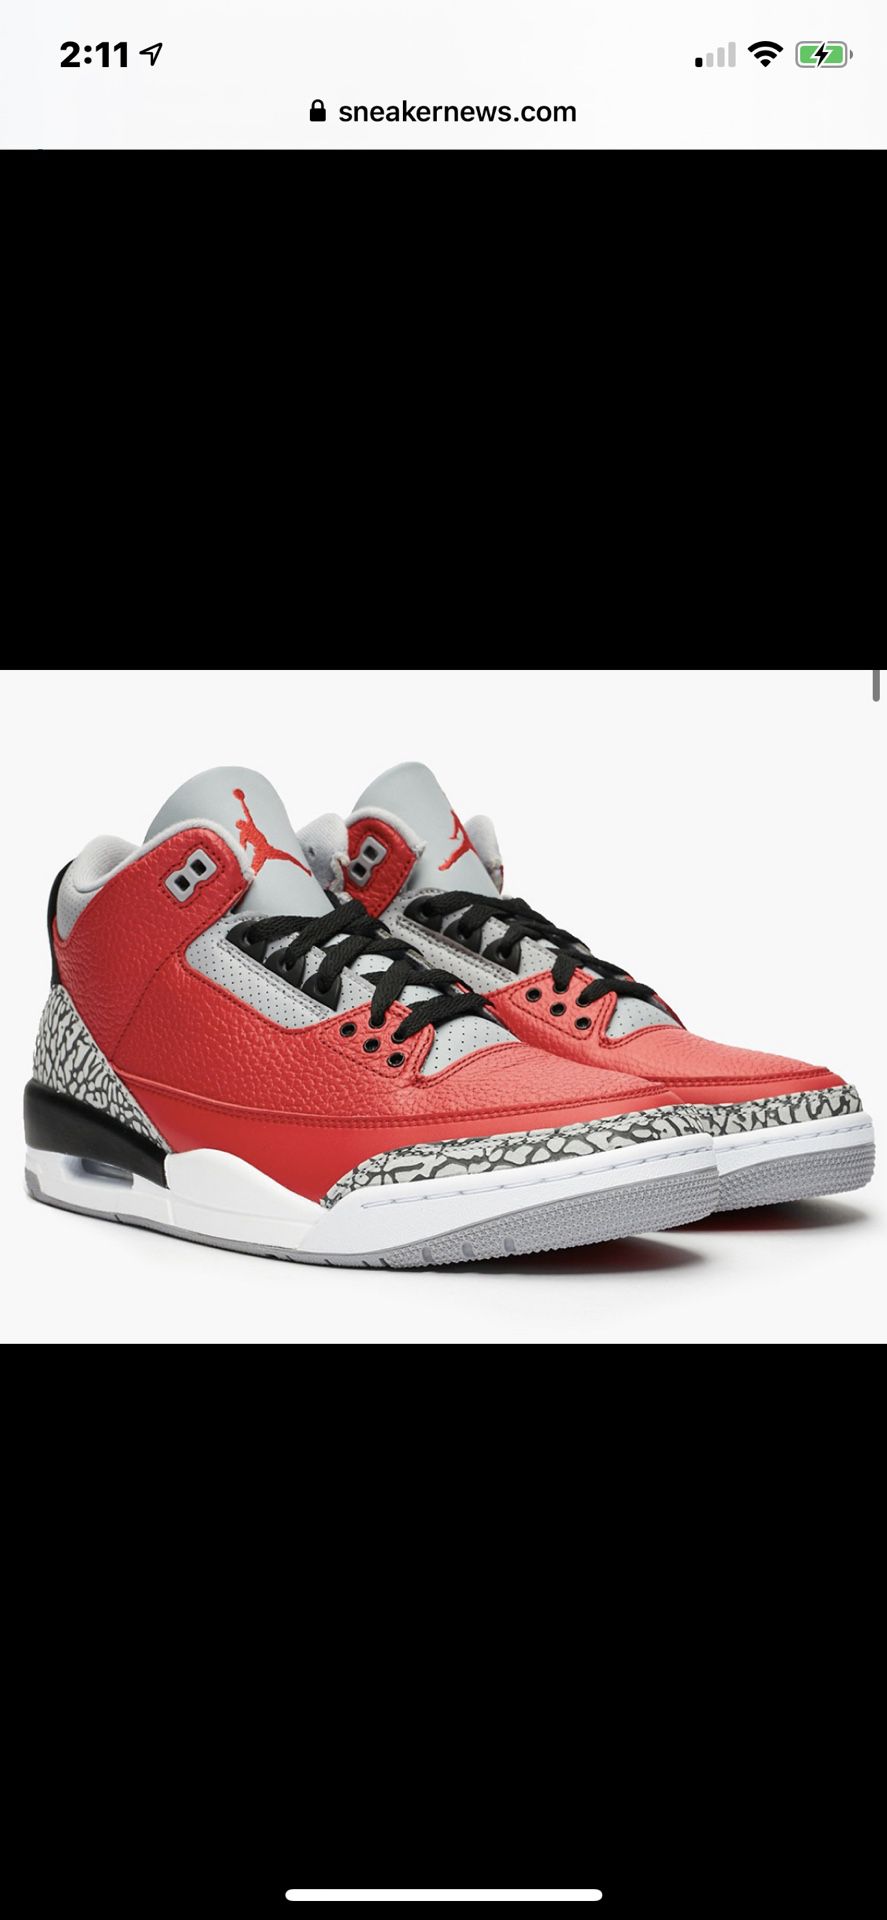 AIR JORDAN RETRO 3 FIRE RED IN HAND SIZE 8.5